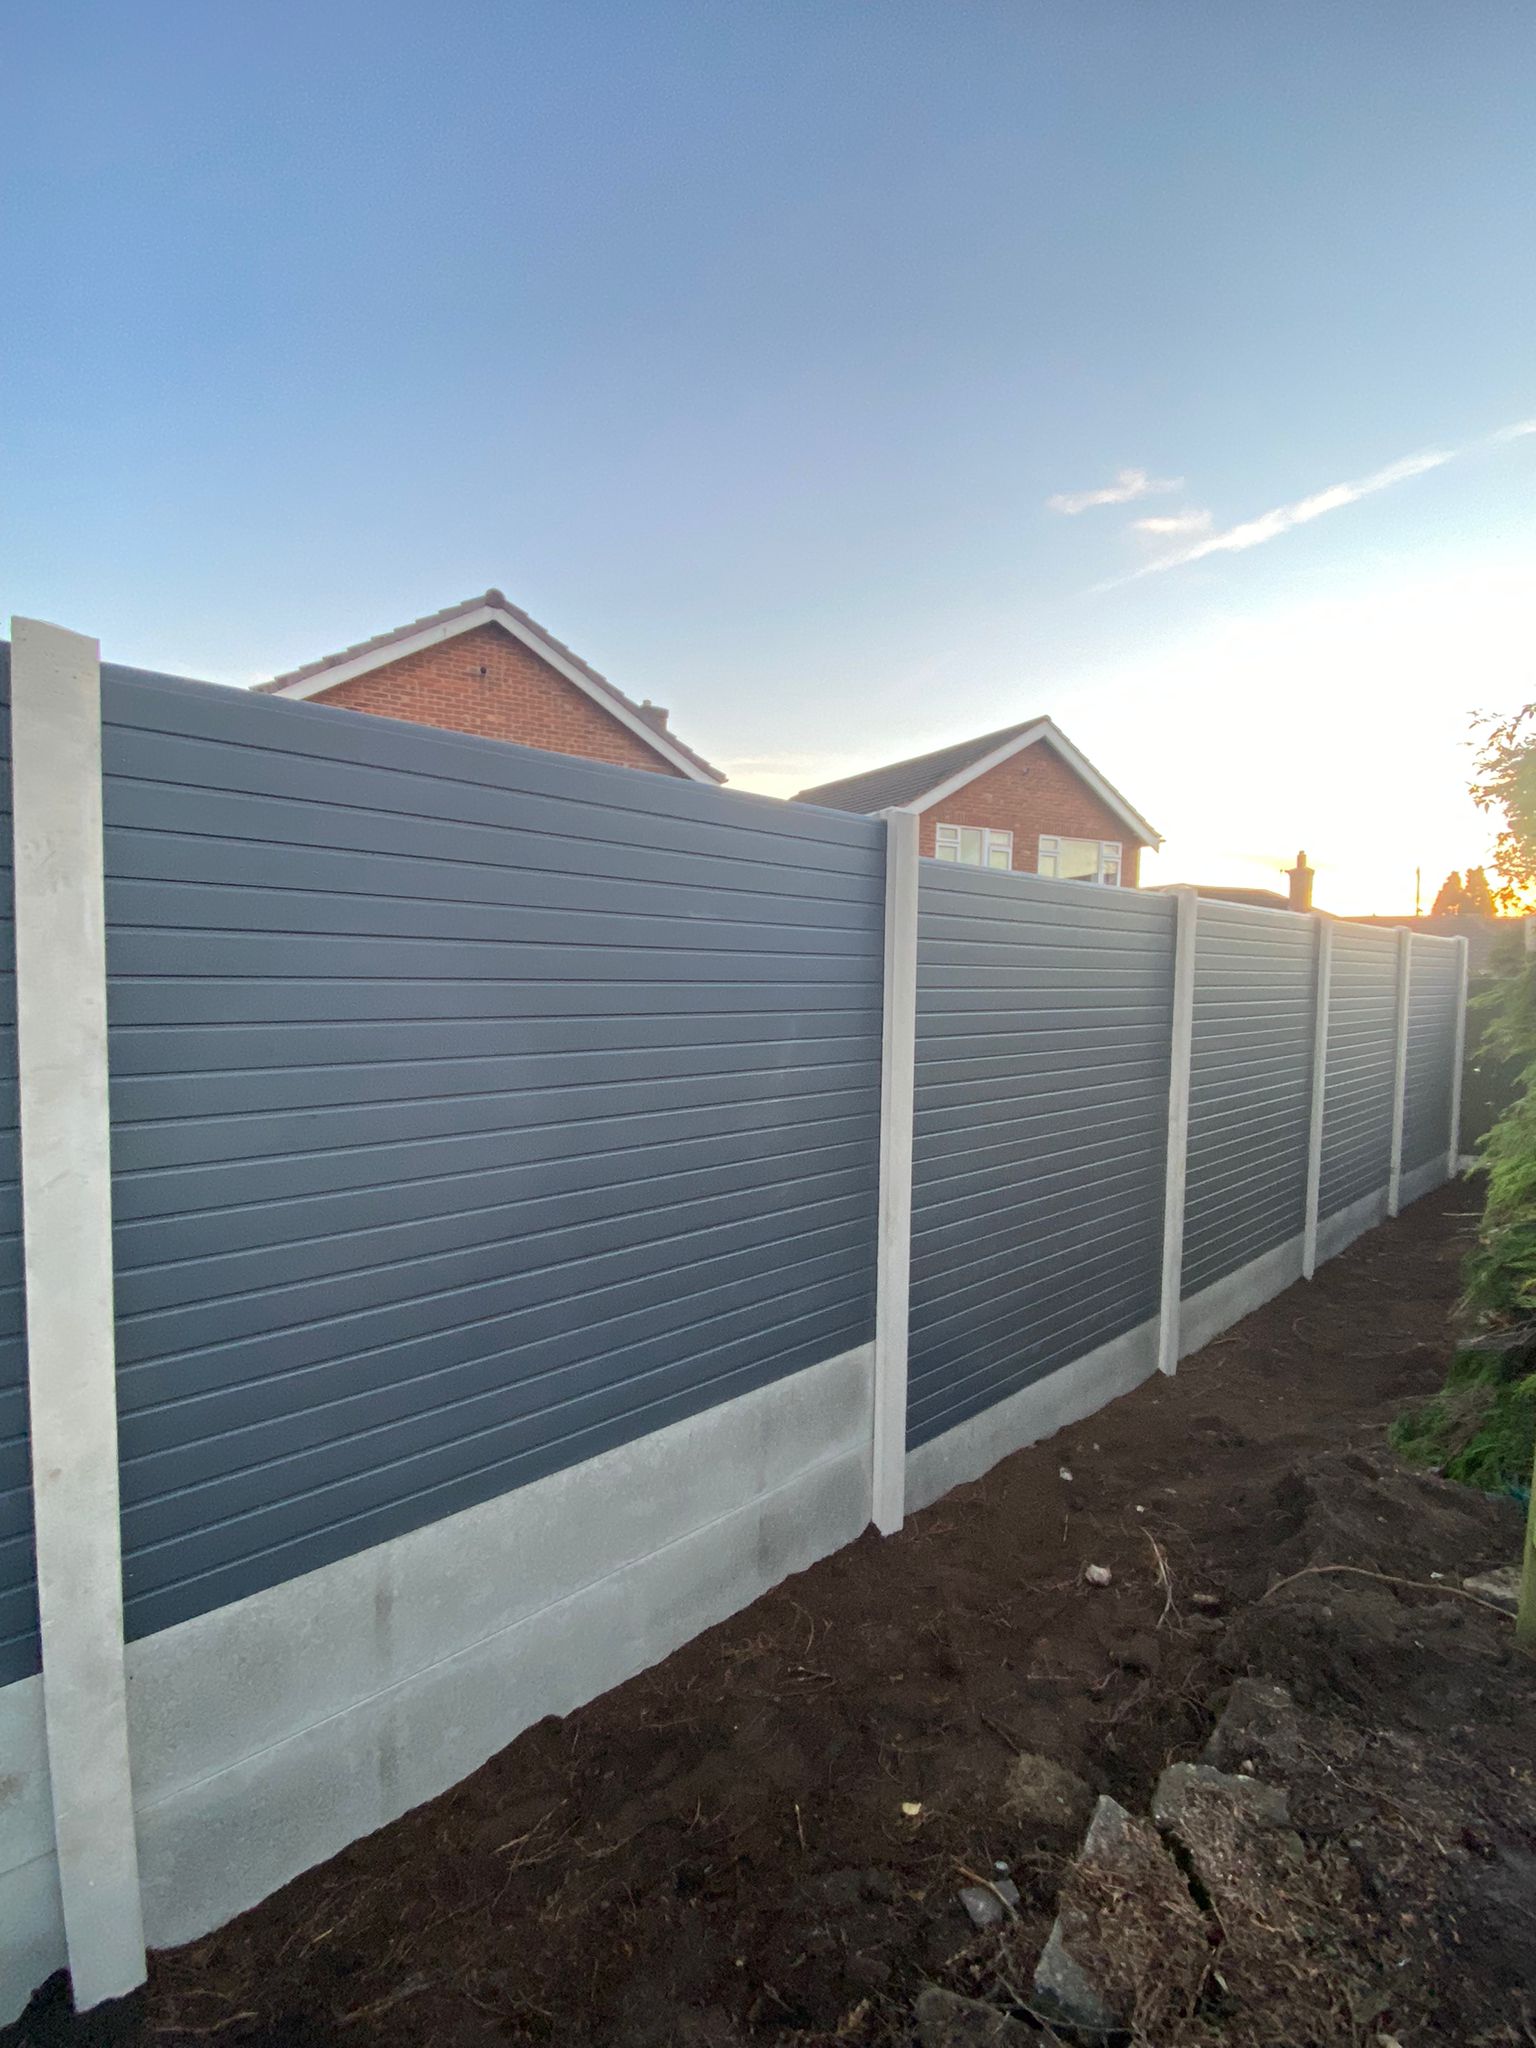 composite fence panels in concrete posts